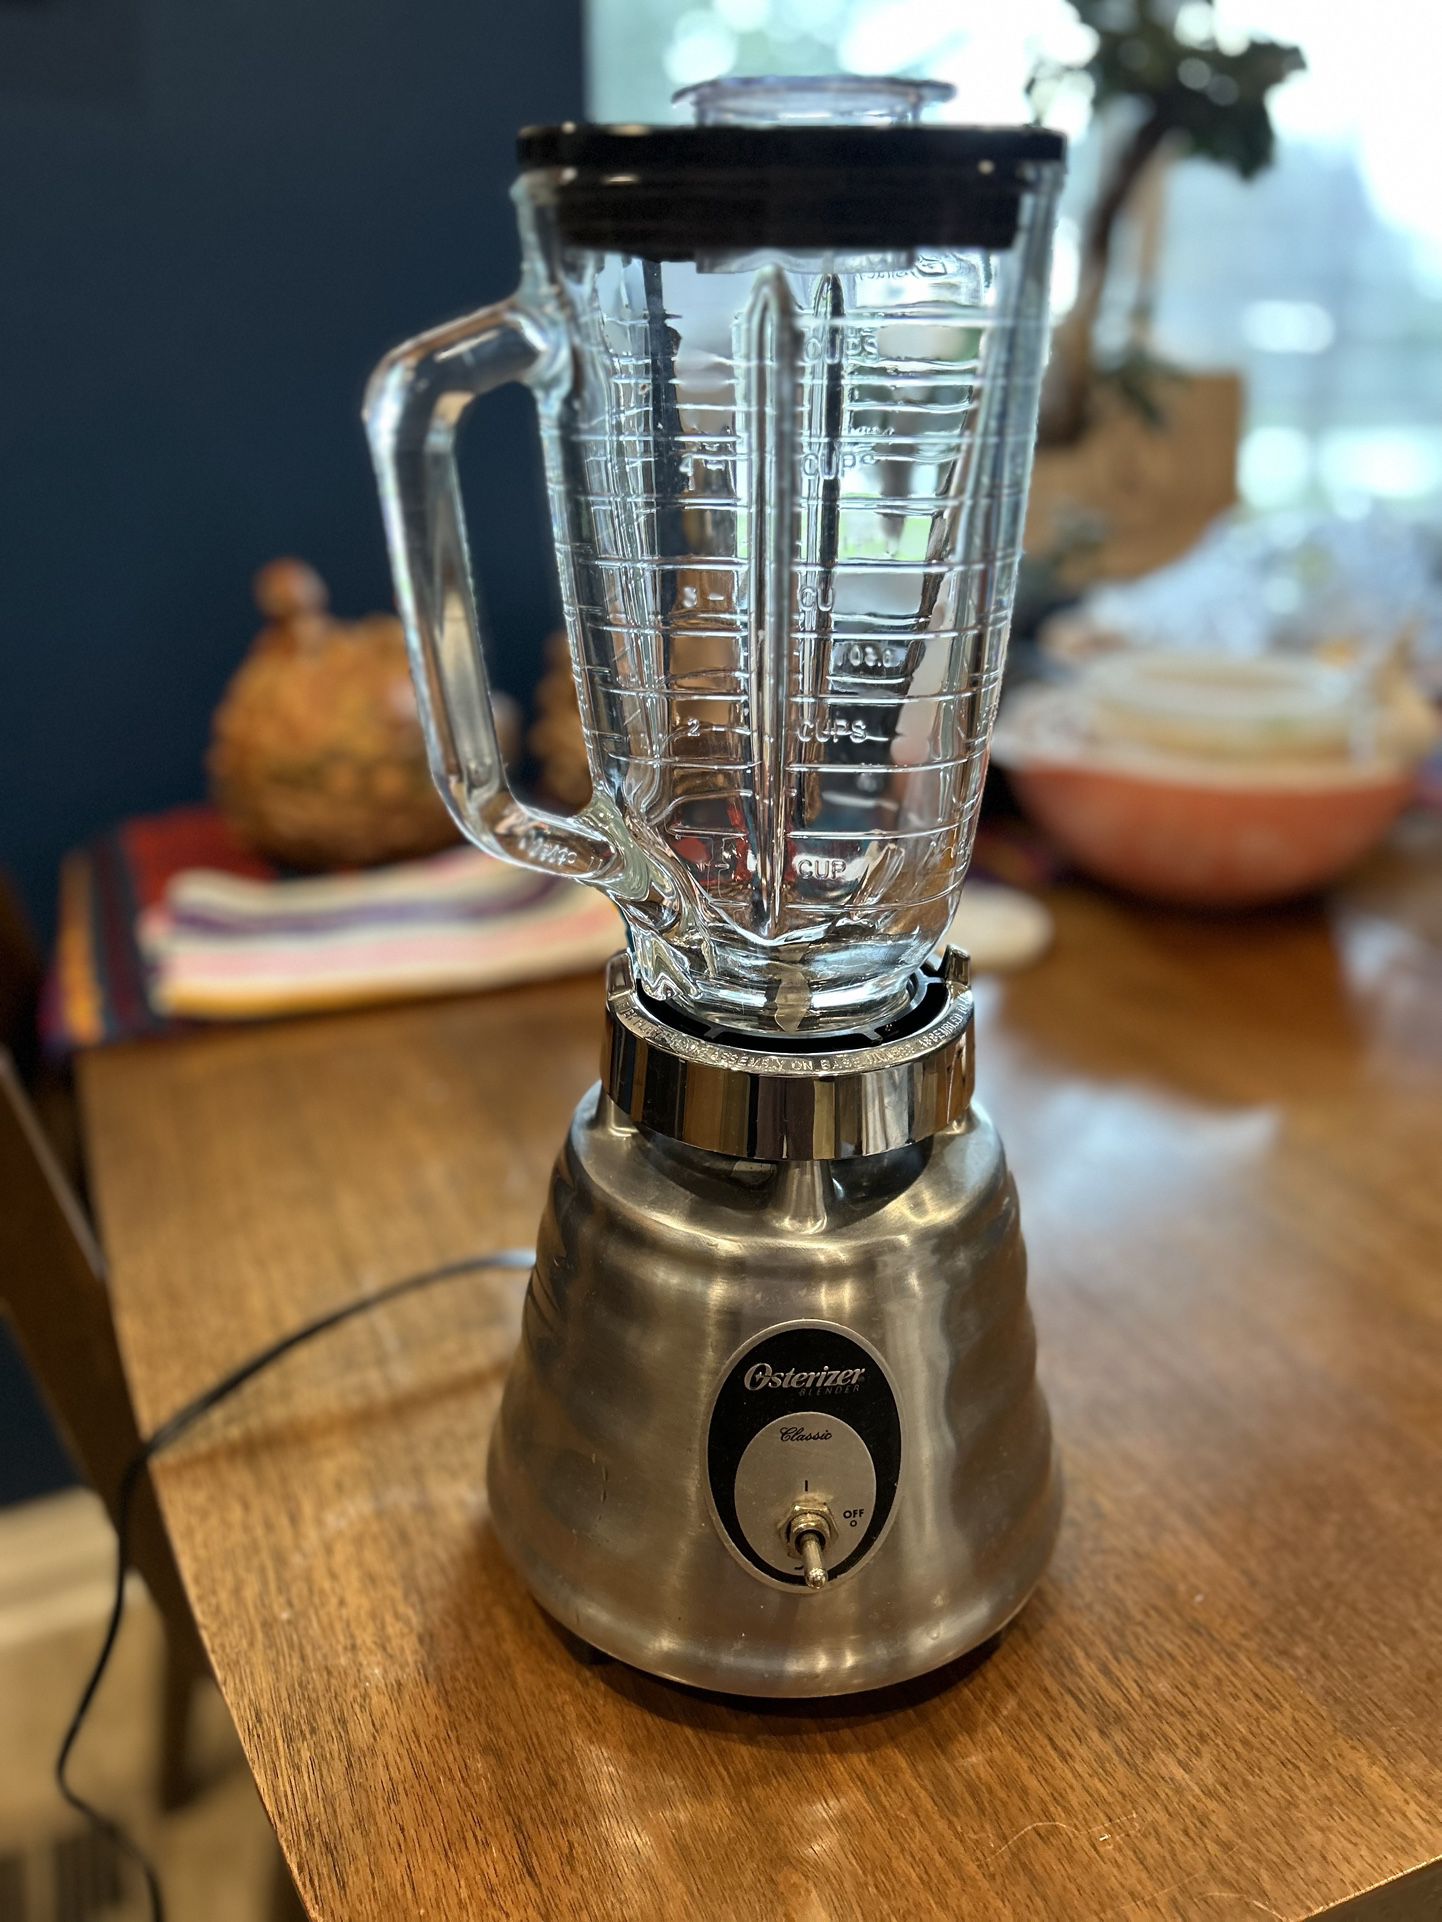 Oster Osterizer Classic Chrome Beehive Blender 500W 4094 5 Cup Nice! for Sale in Portland, OR - OfferUp